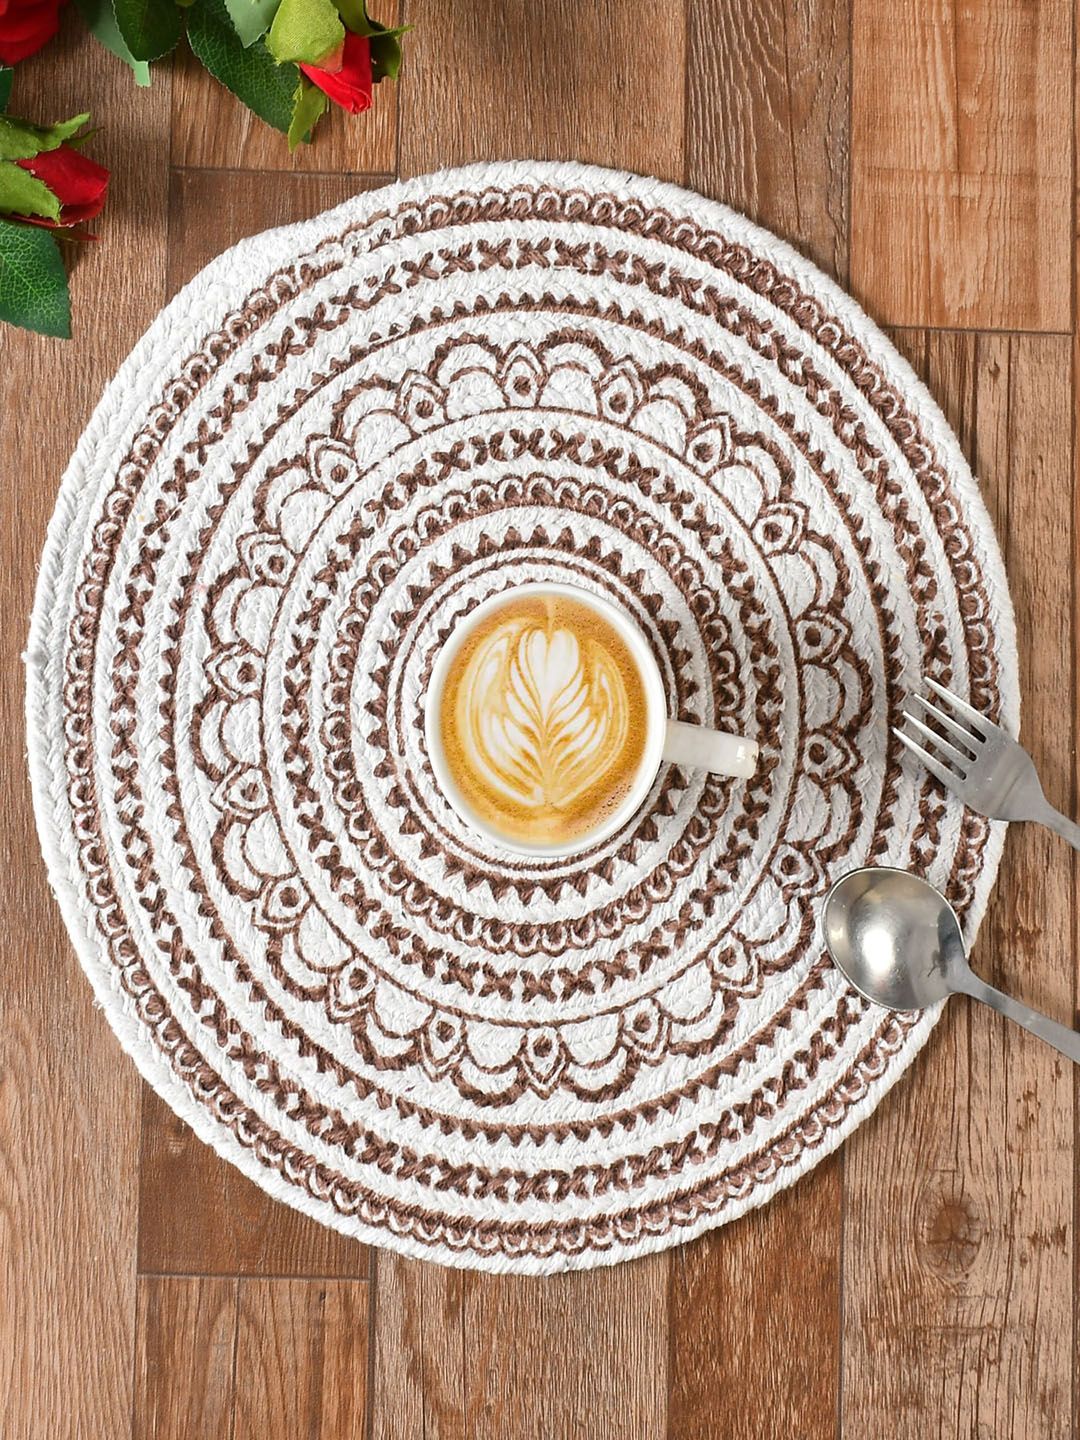 Homefab India Set Of 6 Brown Printed Cotton Table Placemats Price in India